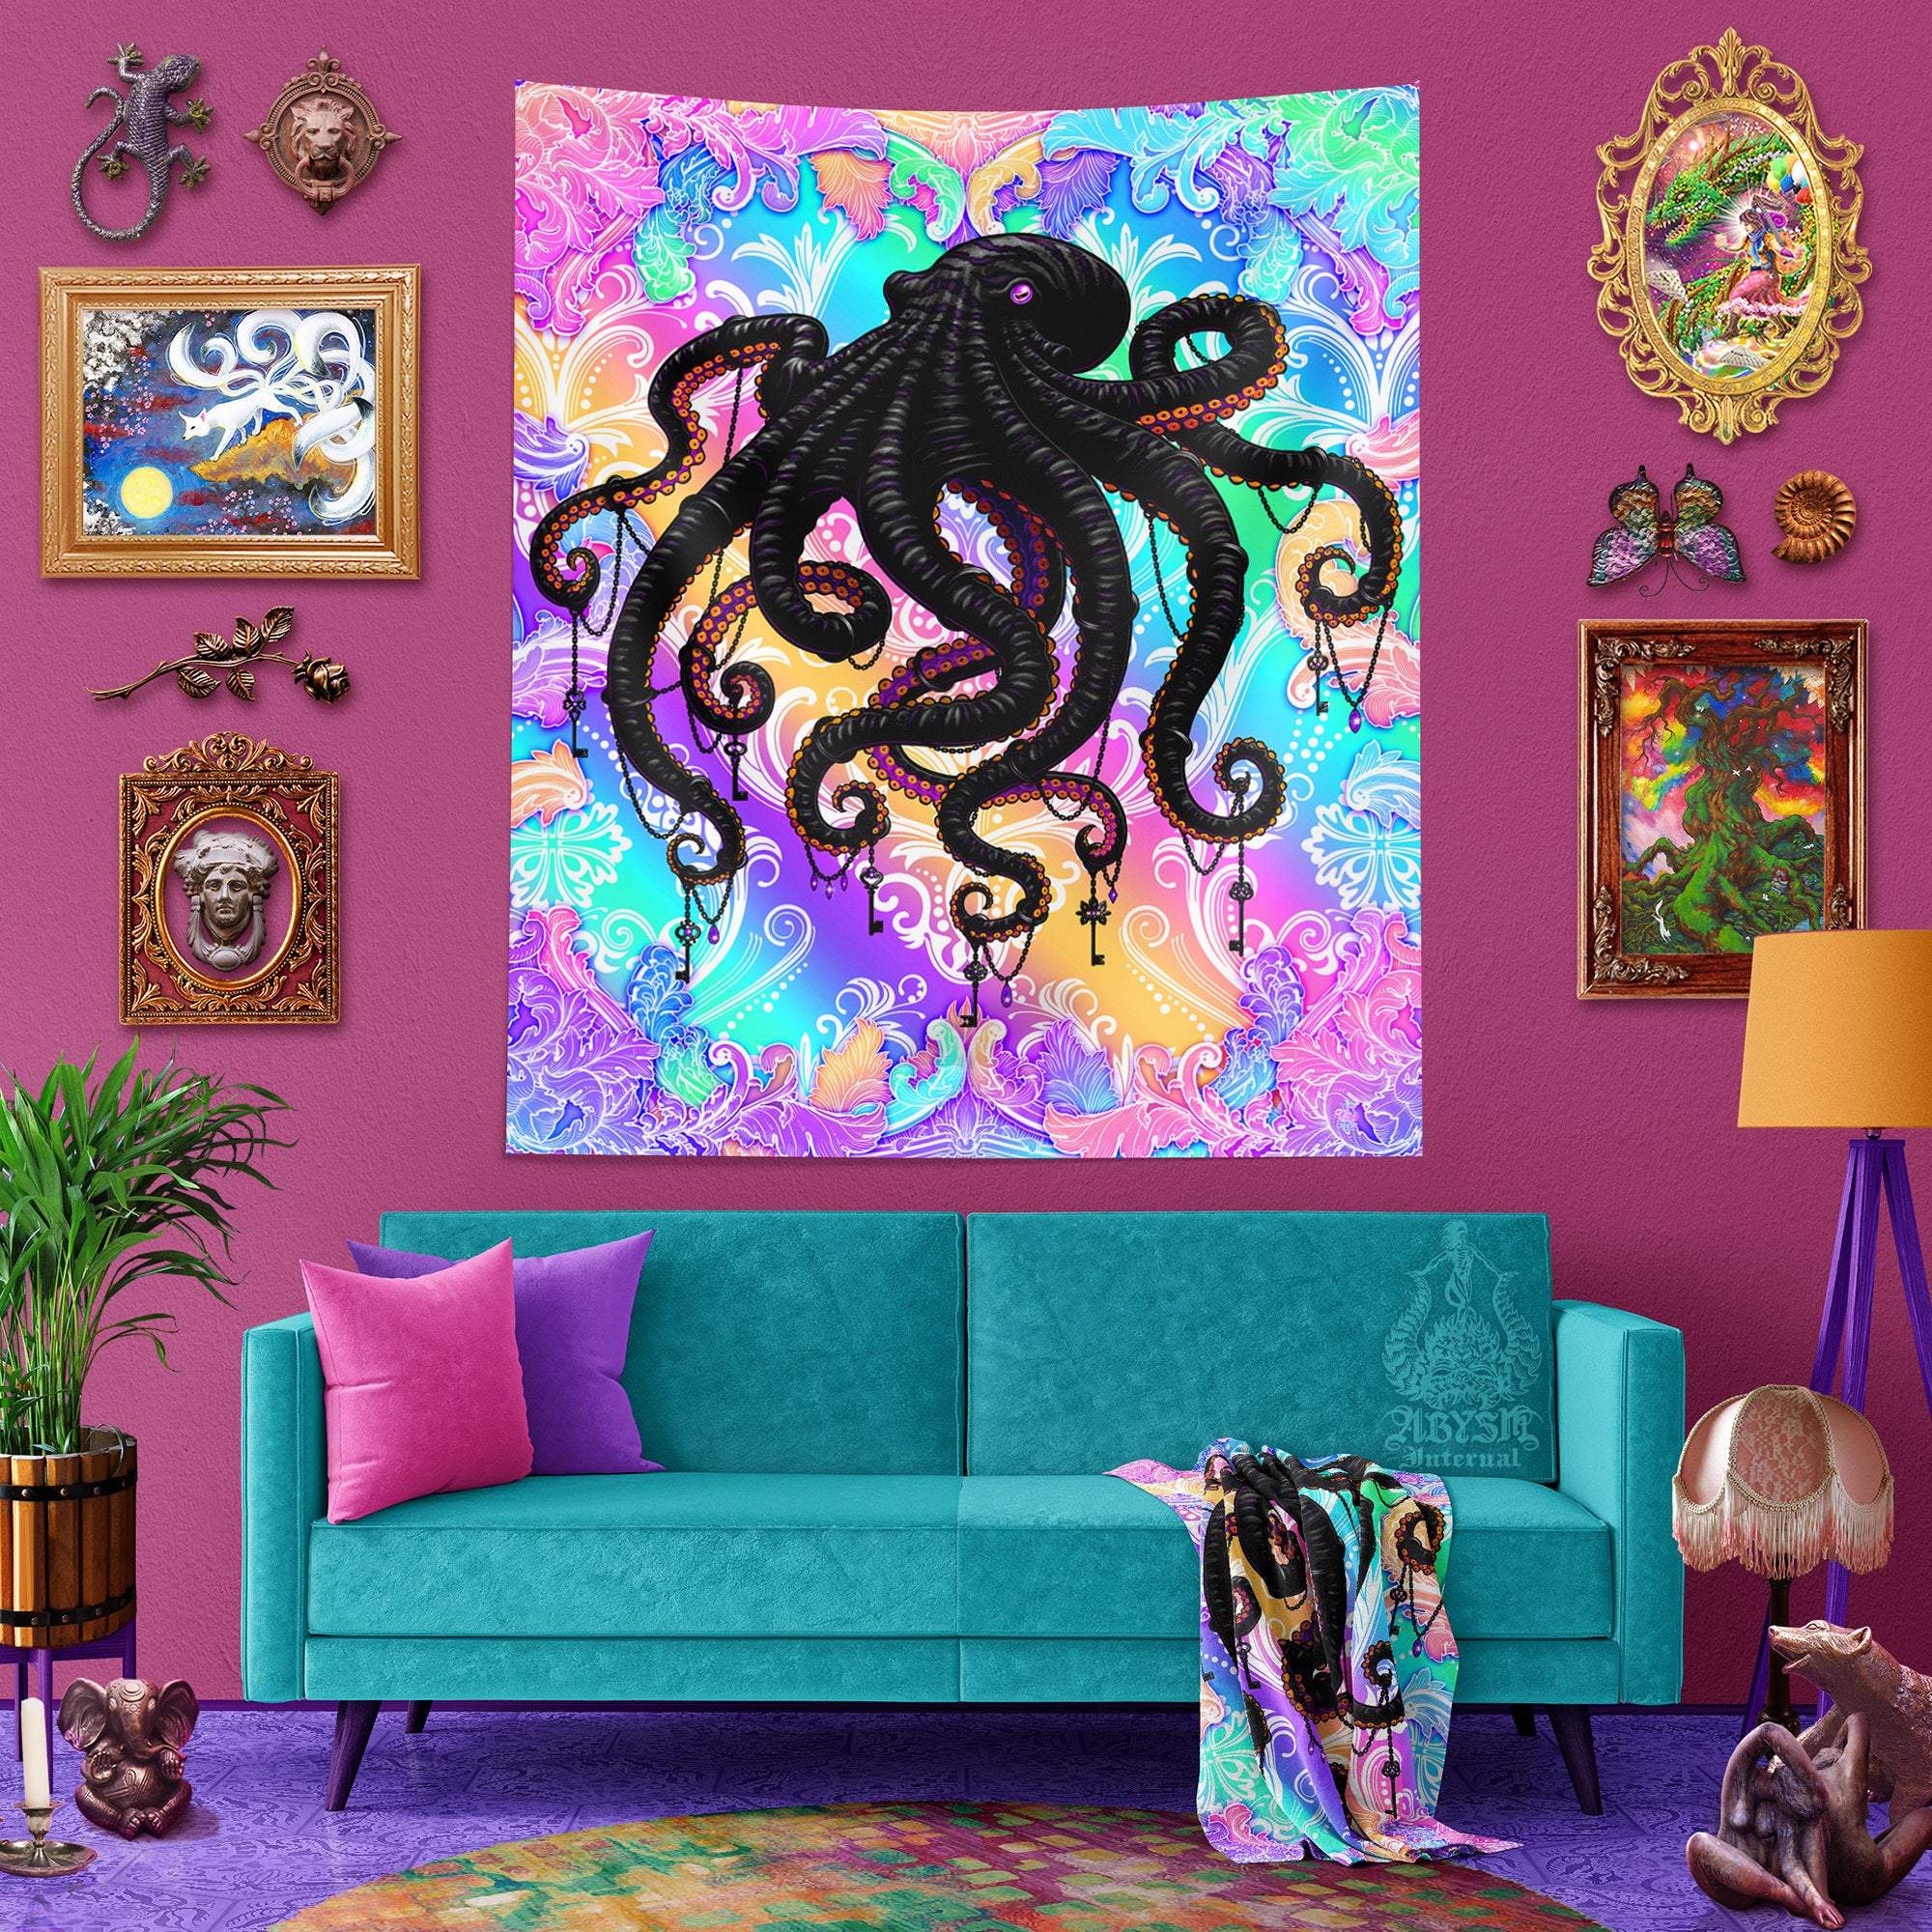 Octopus Tapestry, Holographic Wall Hanging, Psychedelic and Indie Home Decor, Art Print, Eclectic and Funky - Pastel Punk Black - Abysm Internal